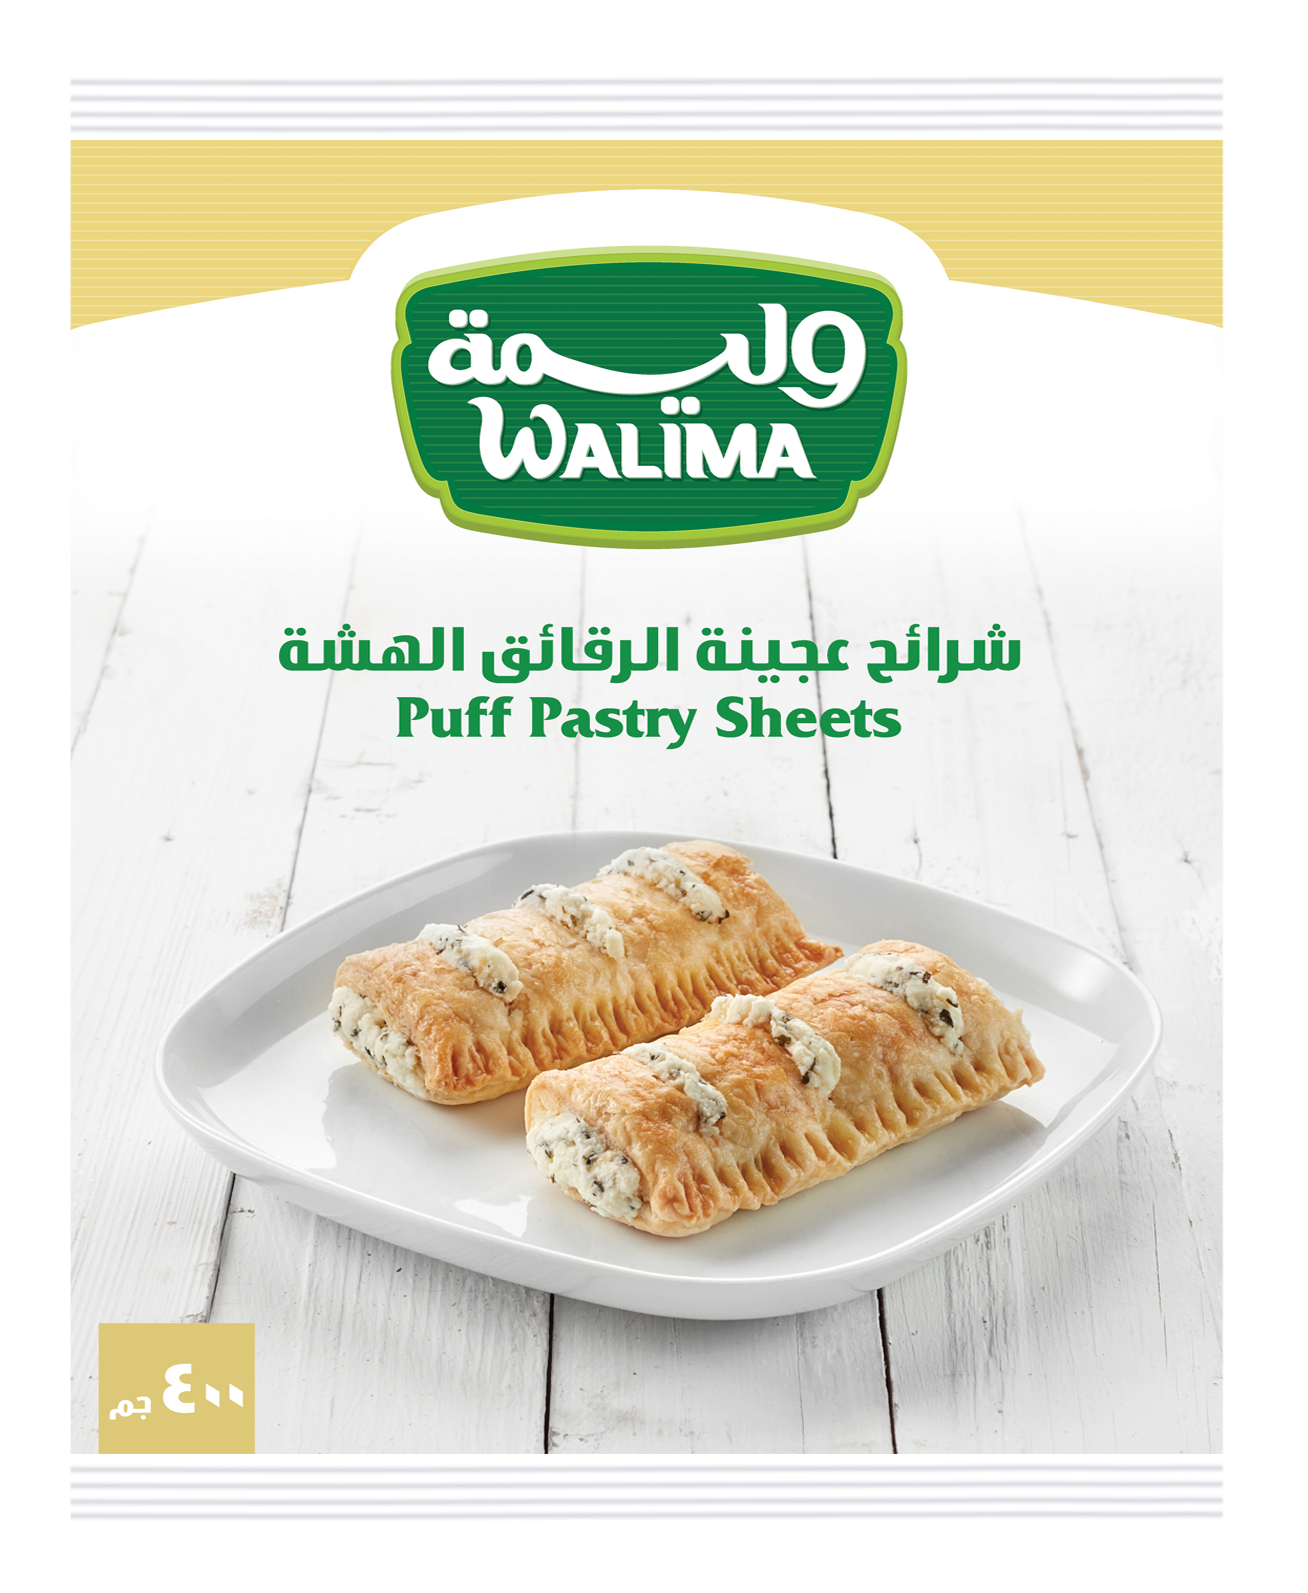 Walimah-Puff-Pastry.png